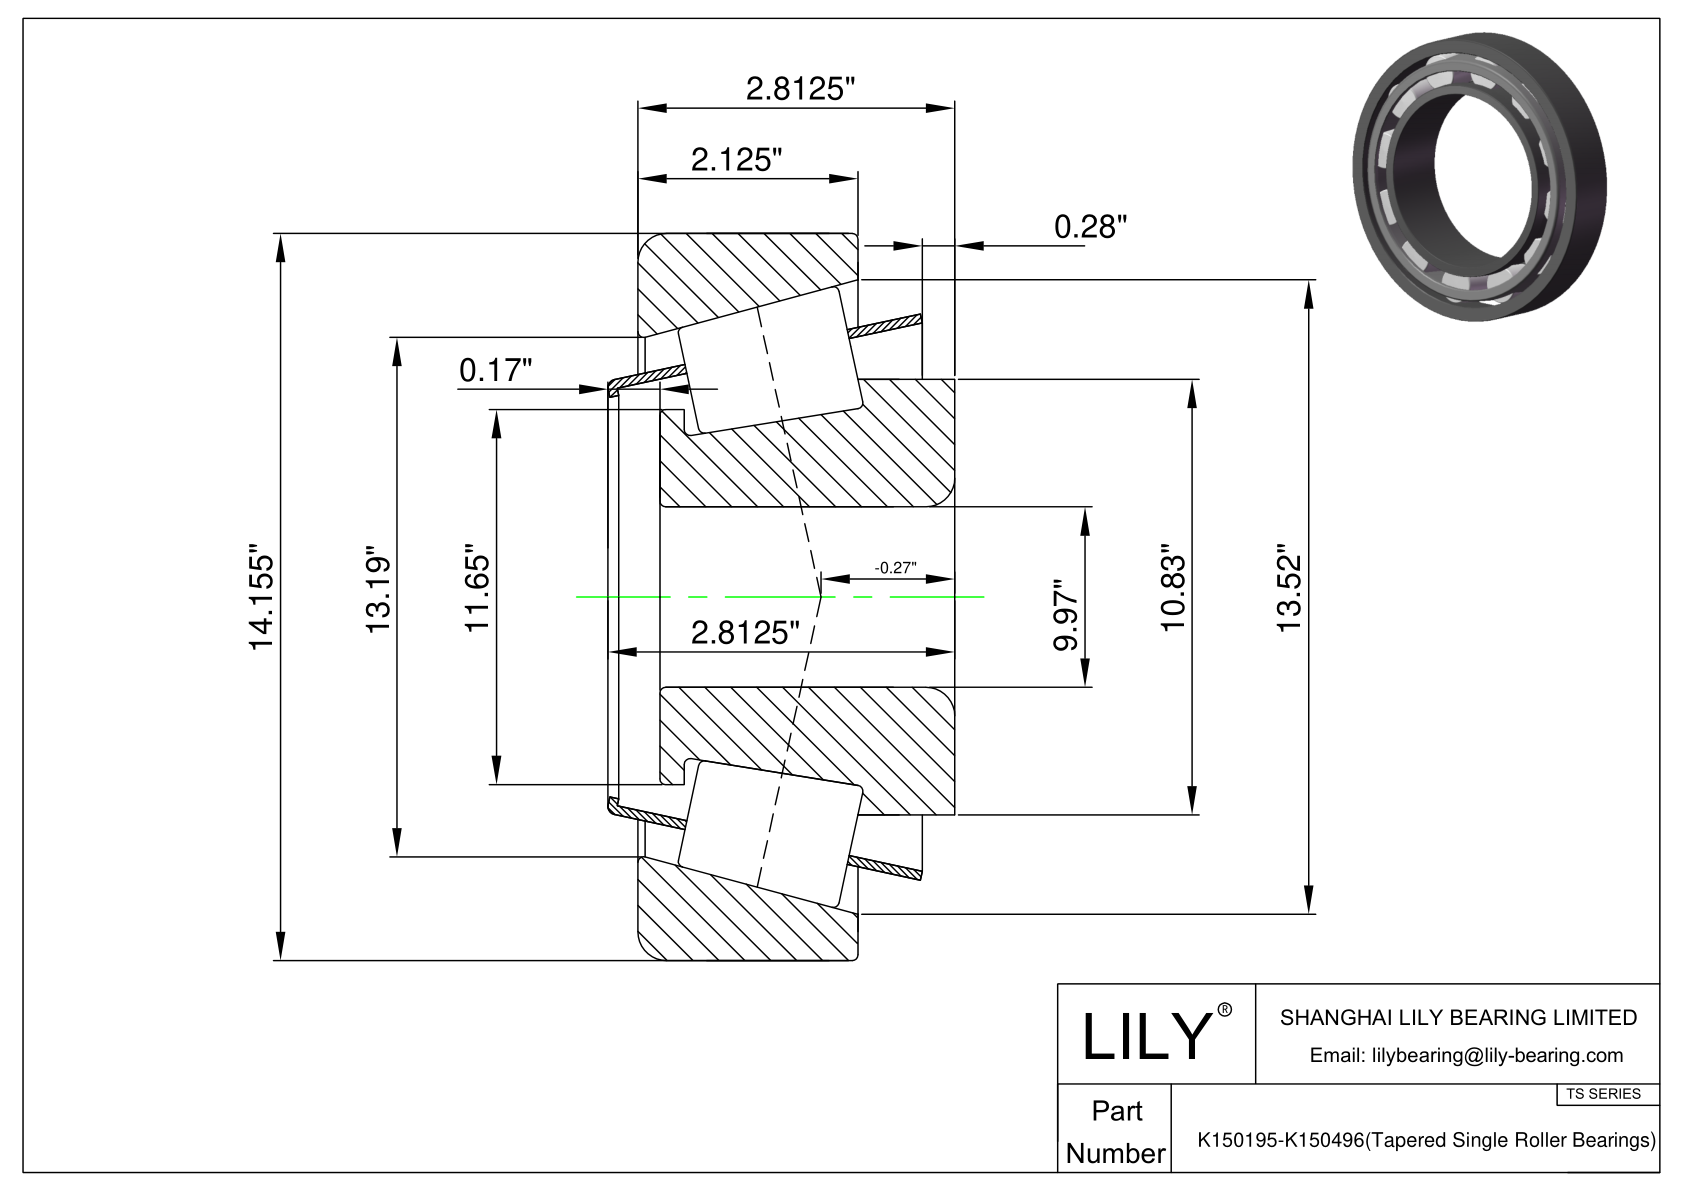 K150195-K150496 TS (Tapered Single Roller Bearings) (Imperial) cad drawing